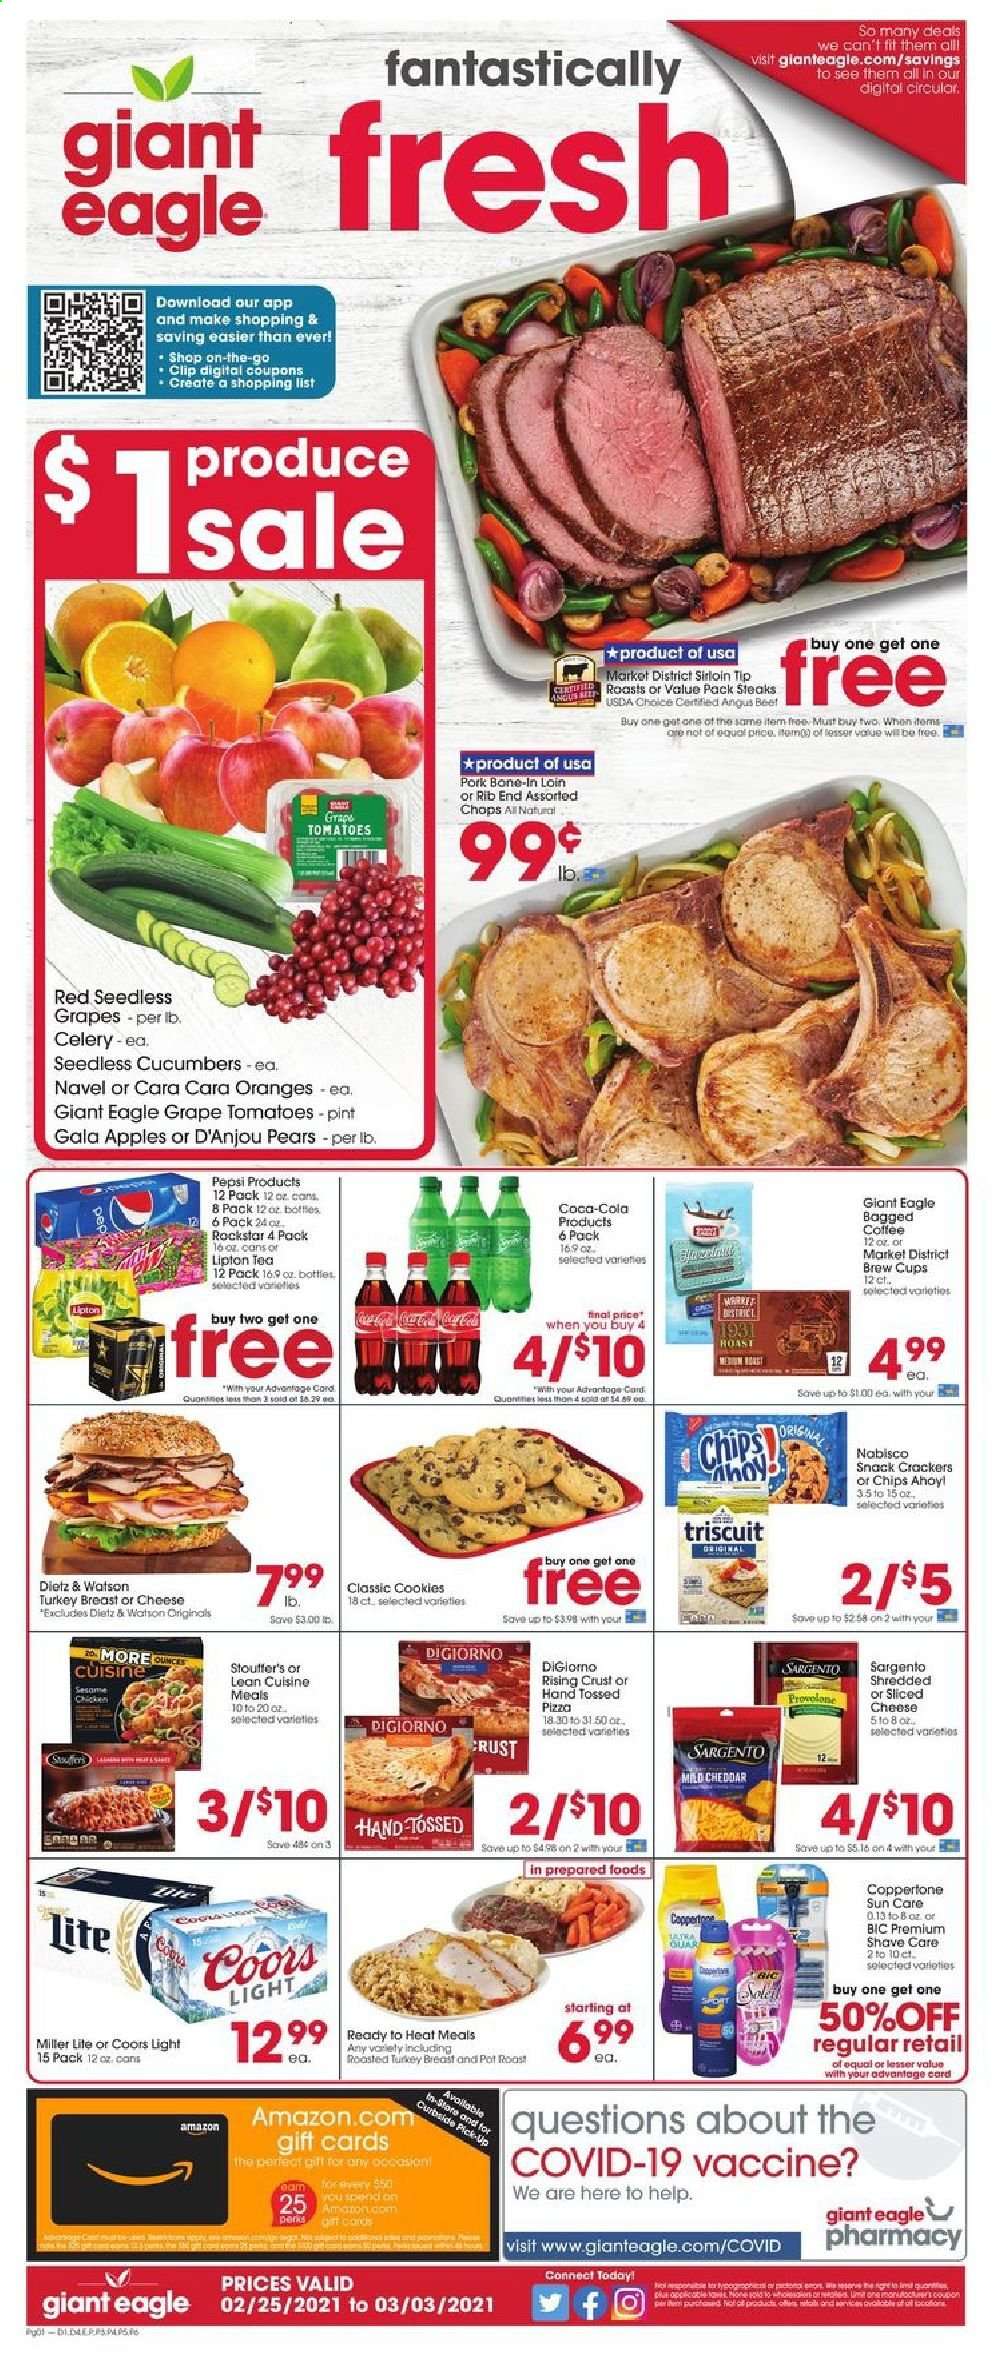 thumbnail - Giant Eagle Flyer - 02/25/2021 - 03/03/2021 - Sales products - Miller Lite, Coors, celery, seedless grapes, apples, pears, oranges, pizza, Lean Cuisine, Dietz & Watson, mild cheddar, sliced cheese, Sargento, cookies, crackers, Chips Ahoy!, chips, snack, cucumber, Coca-Cola, Pepsi, Lipton, Rockstar, tea, beer, turkey breast, steak, BIC, pot, cup, Gala. Page 1.